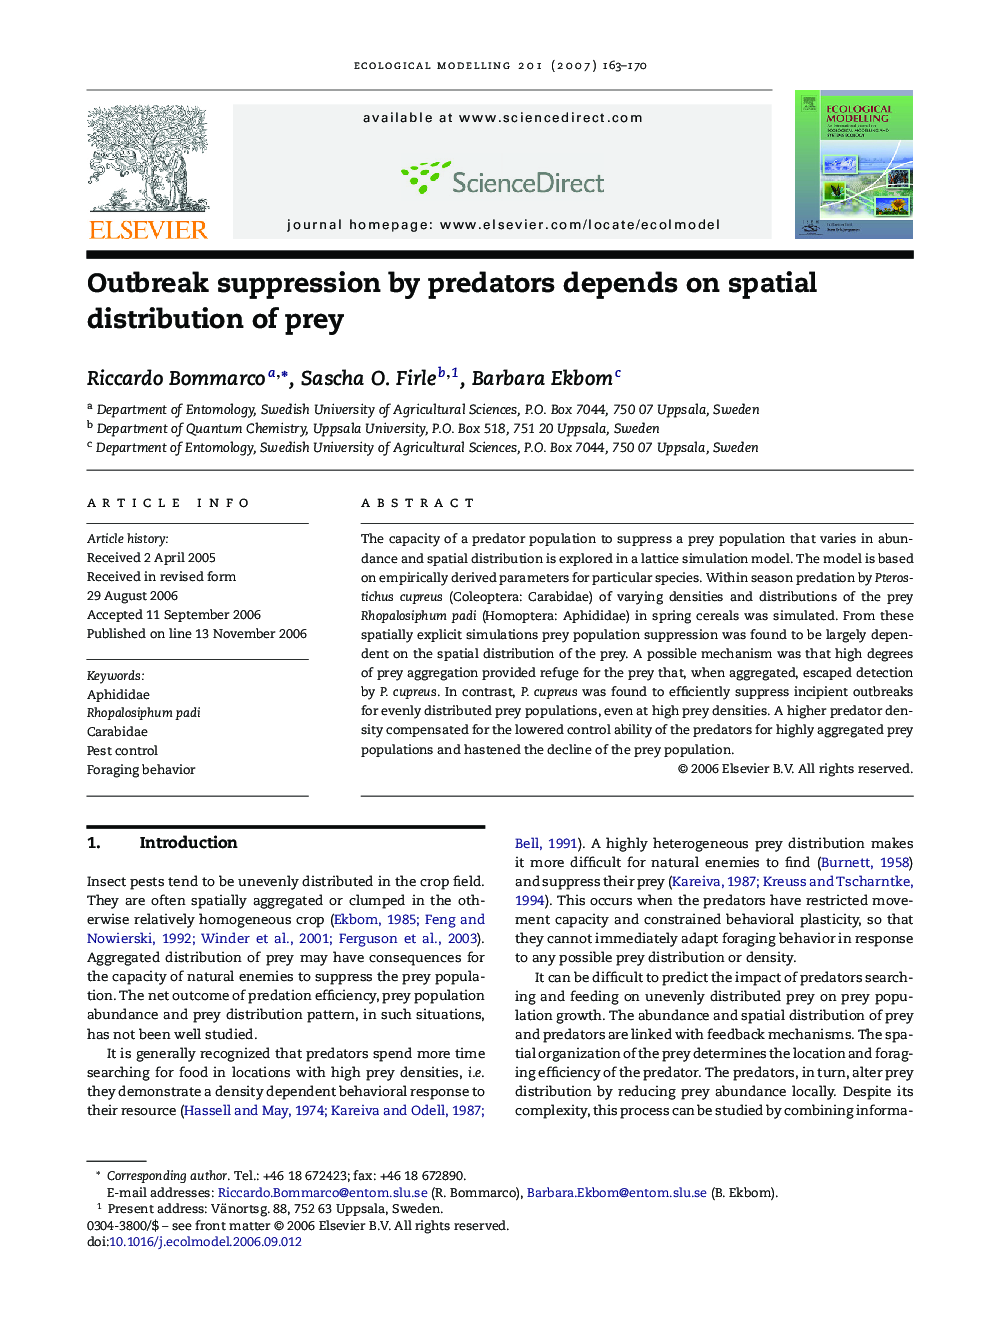 Outbreak suppression by predators depends on spatial distribution of prey